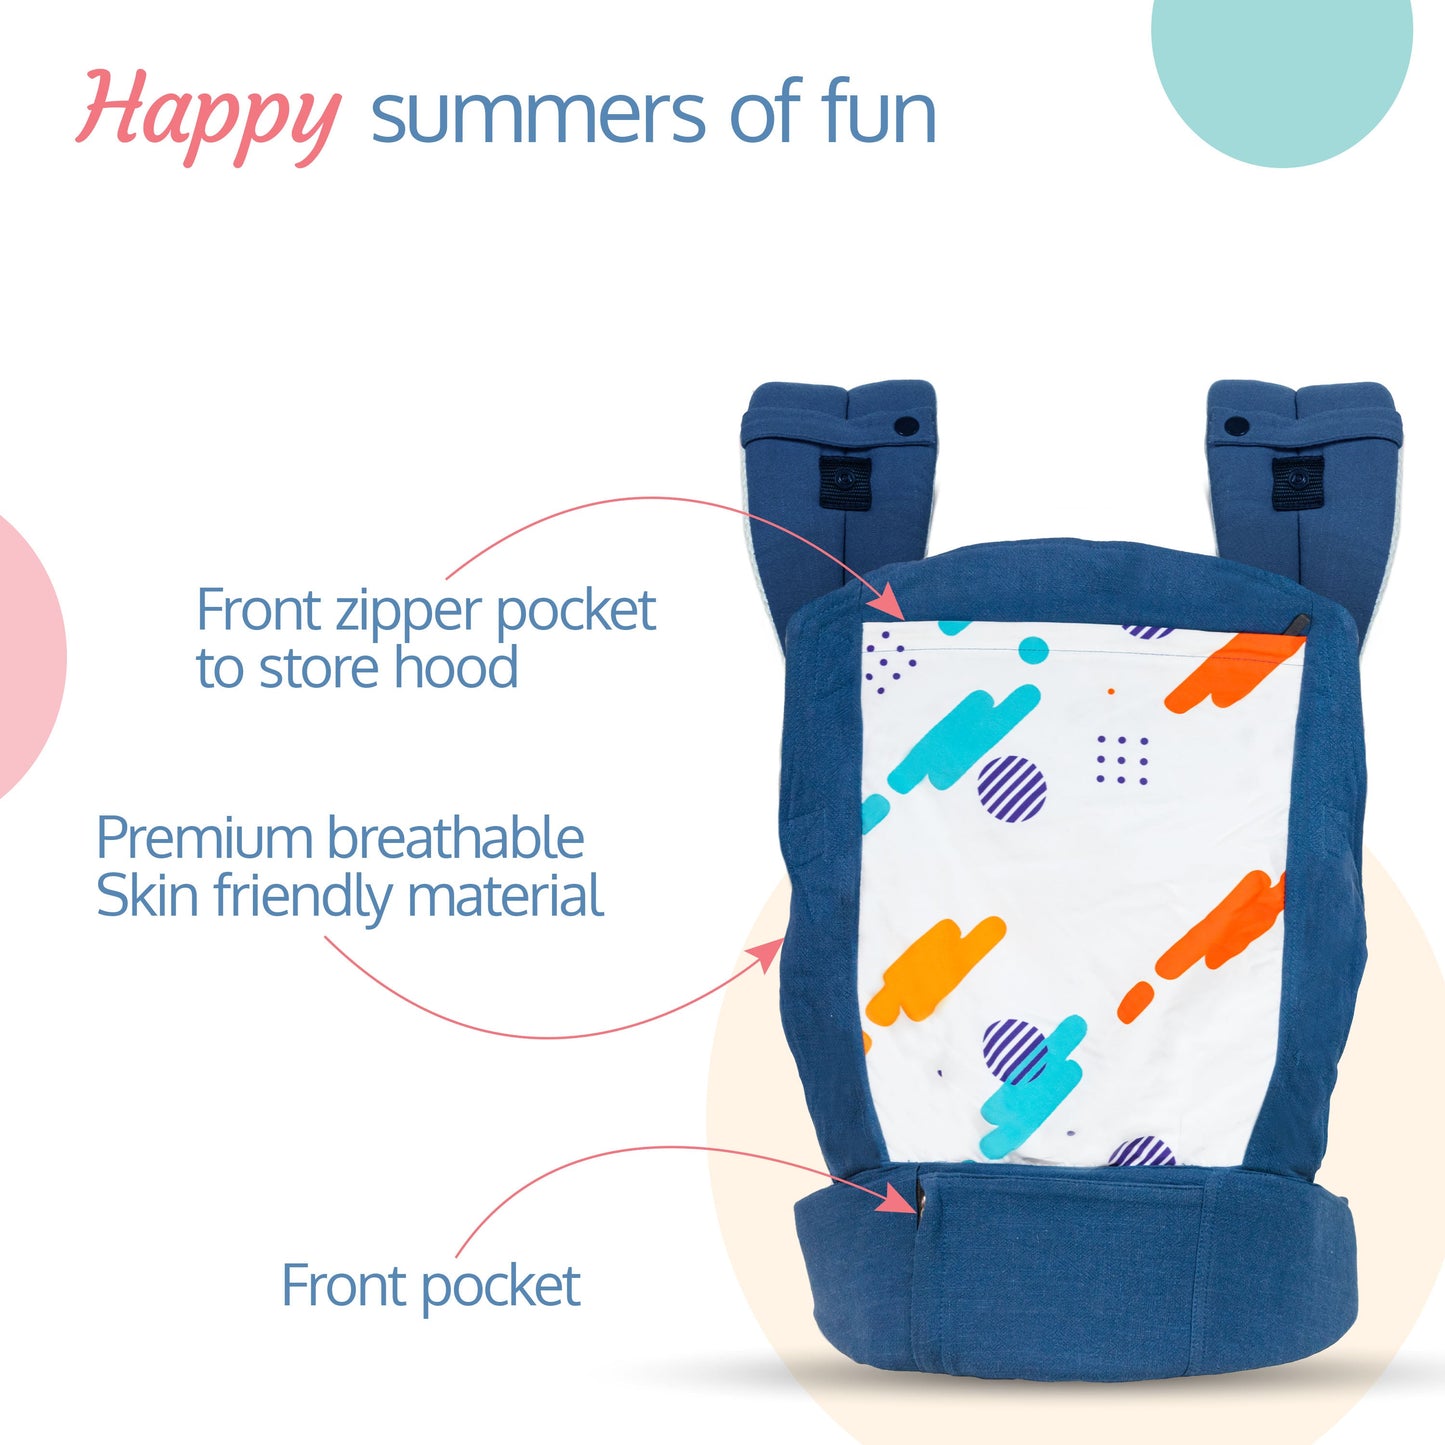 Adore Baby Carrier With 2 Carry Positions (Blue)